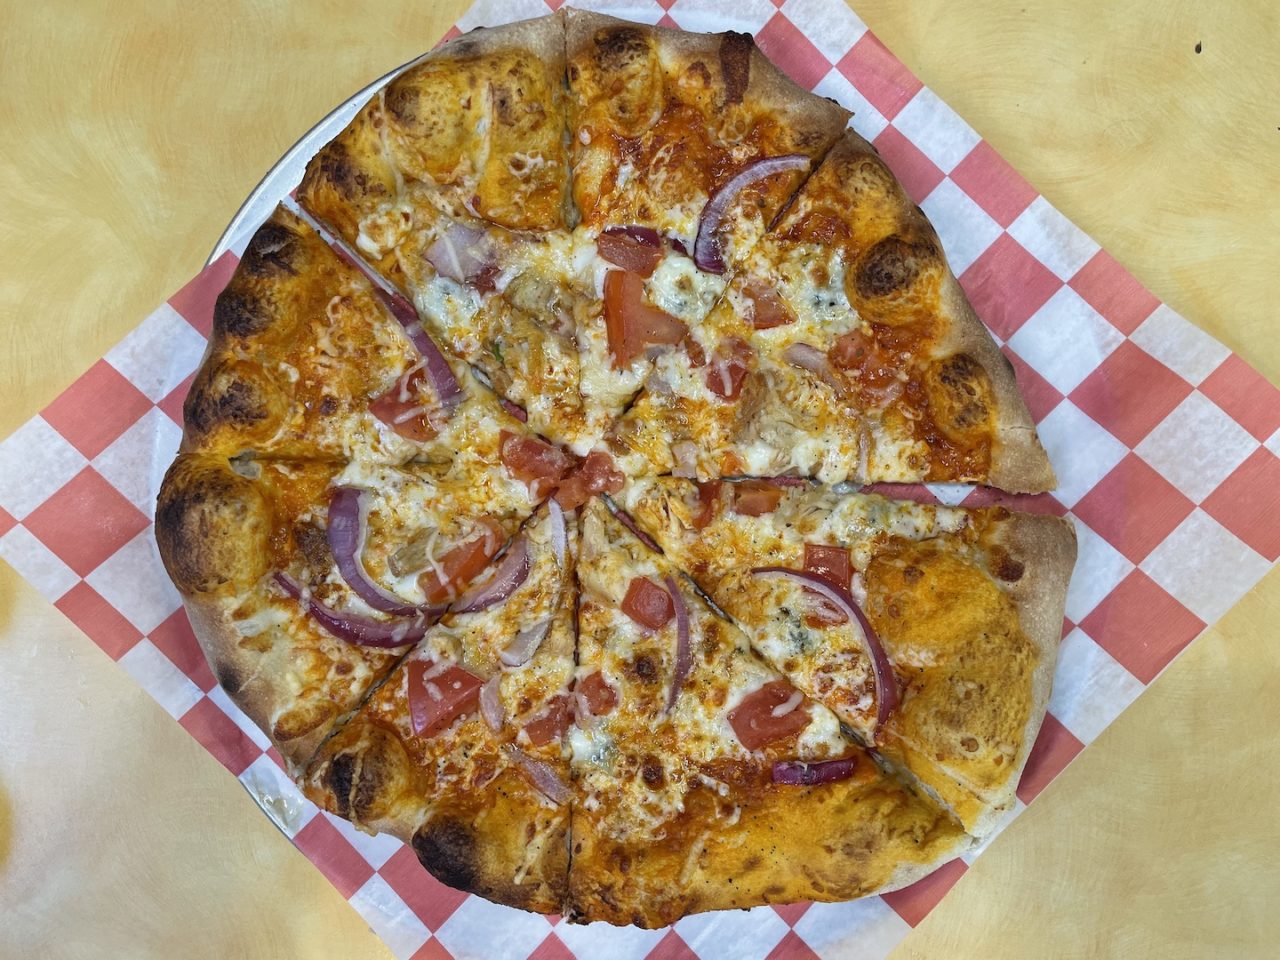 A Pizza from The Compass - photo by Dennis Spielman